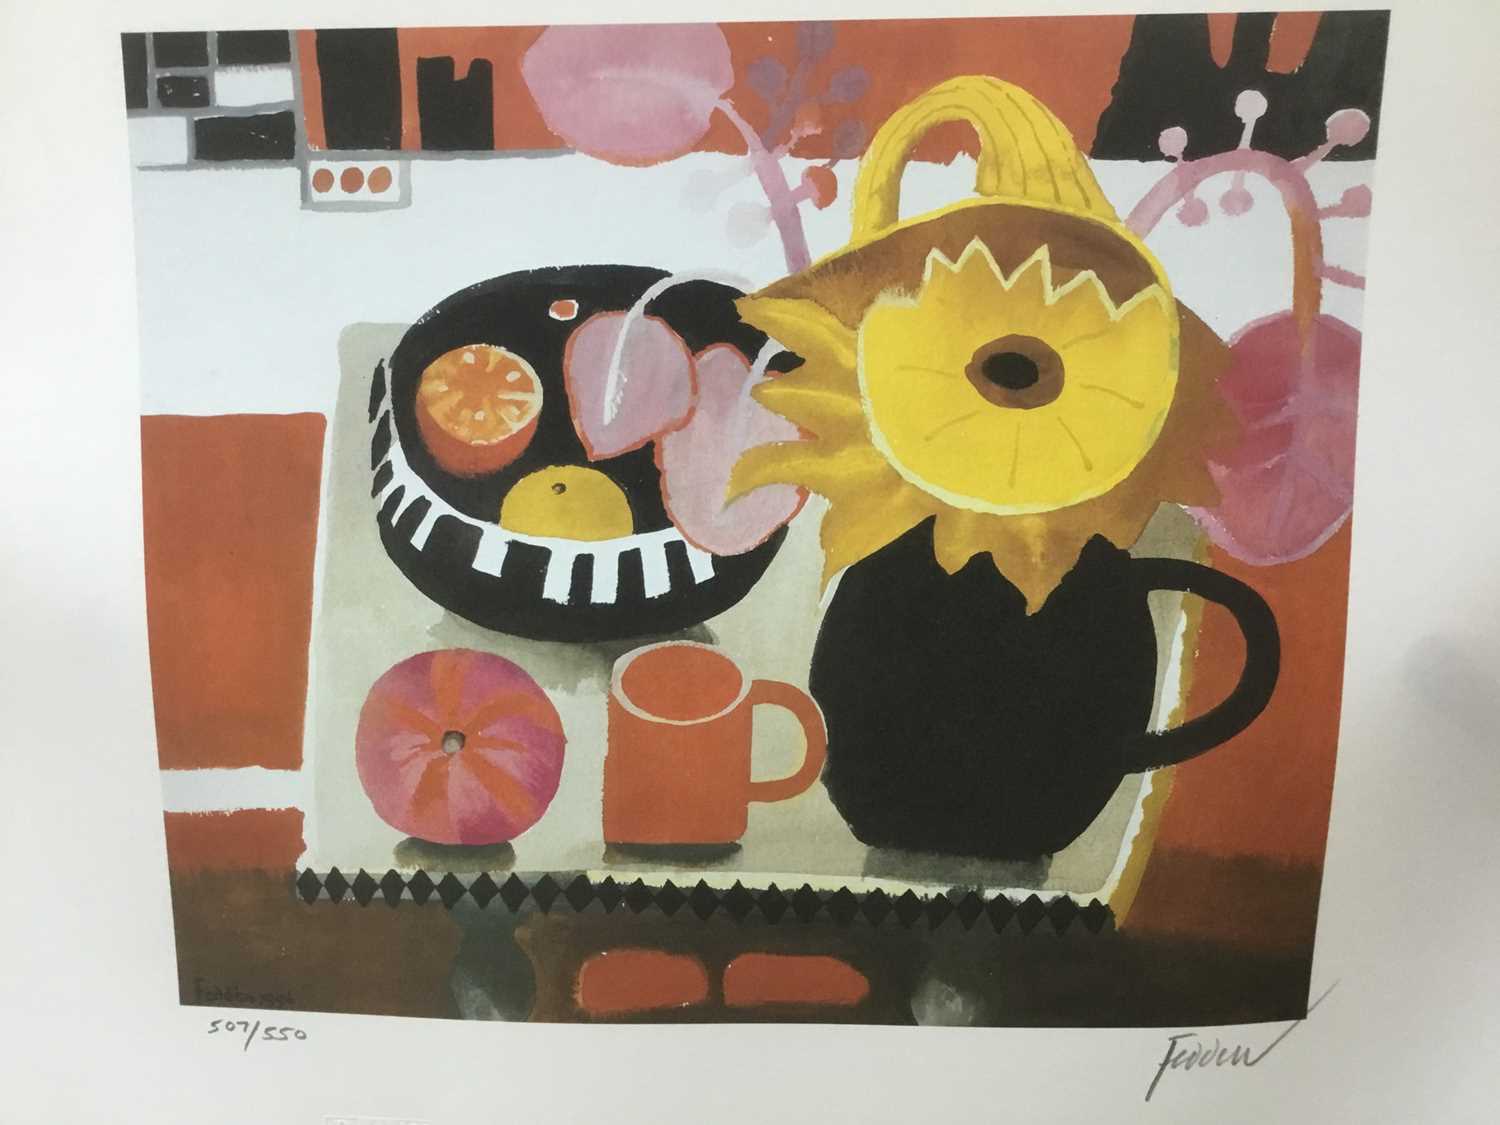 Lot 105 - *Mary Fedden (1915-2012) signed limited edition print, 'The Orange Mug', 1996, No. 507 / 550, published by Bow Art, unframed, 32cm x 40.5cm